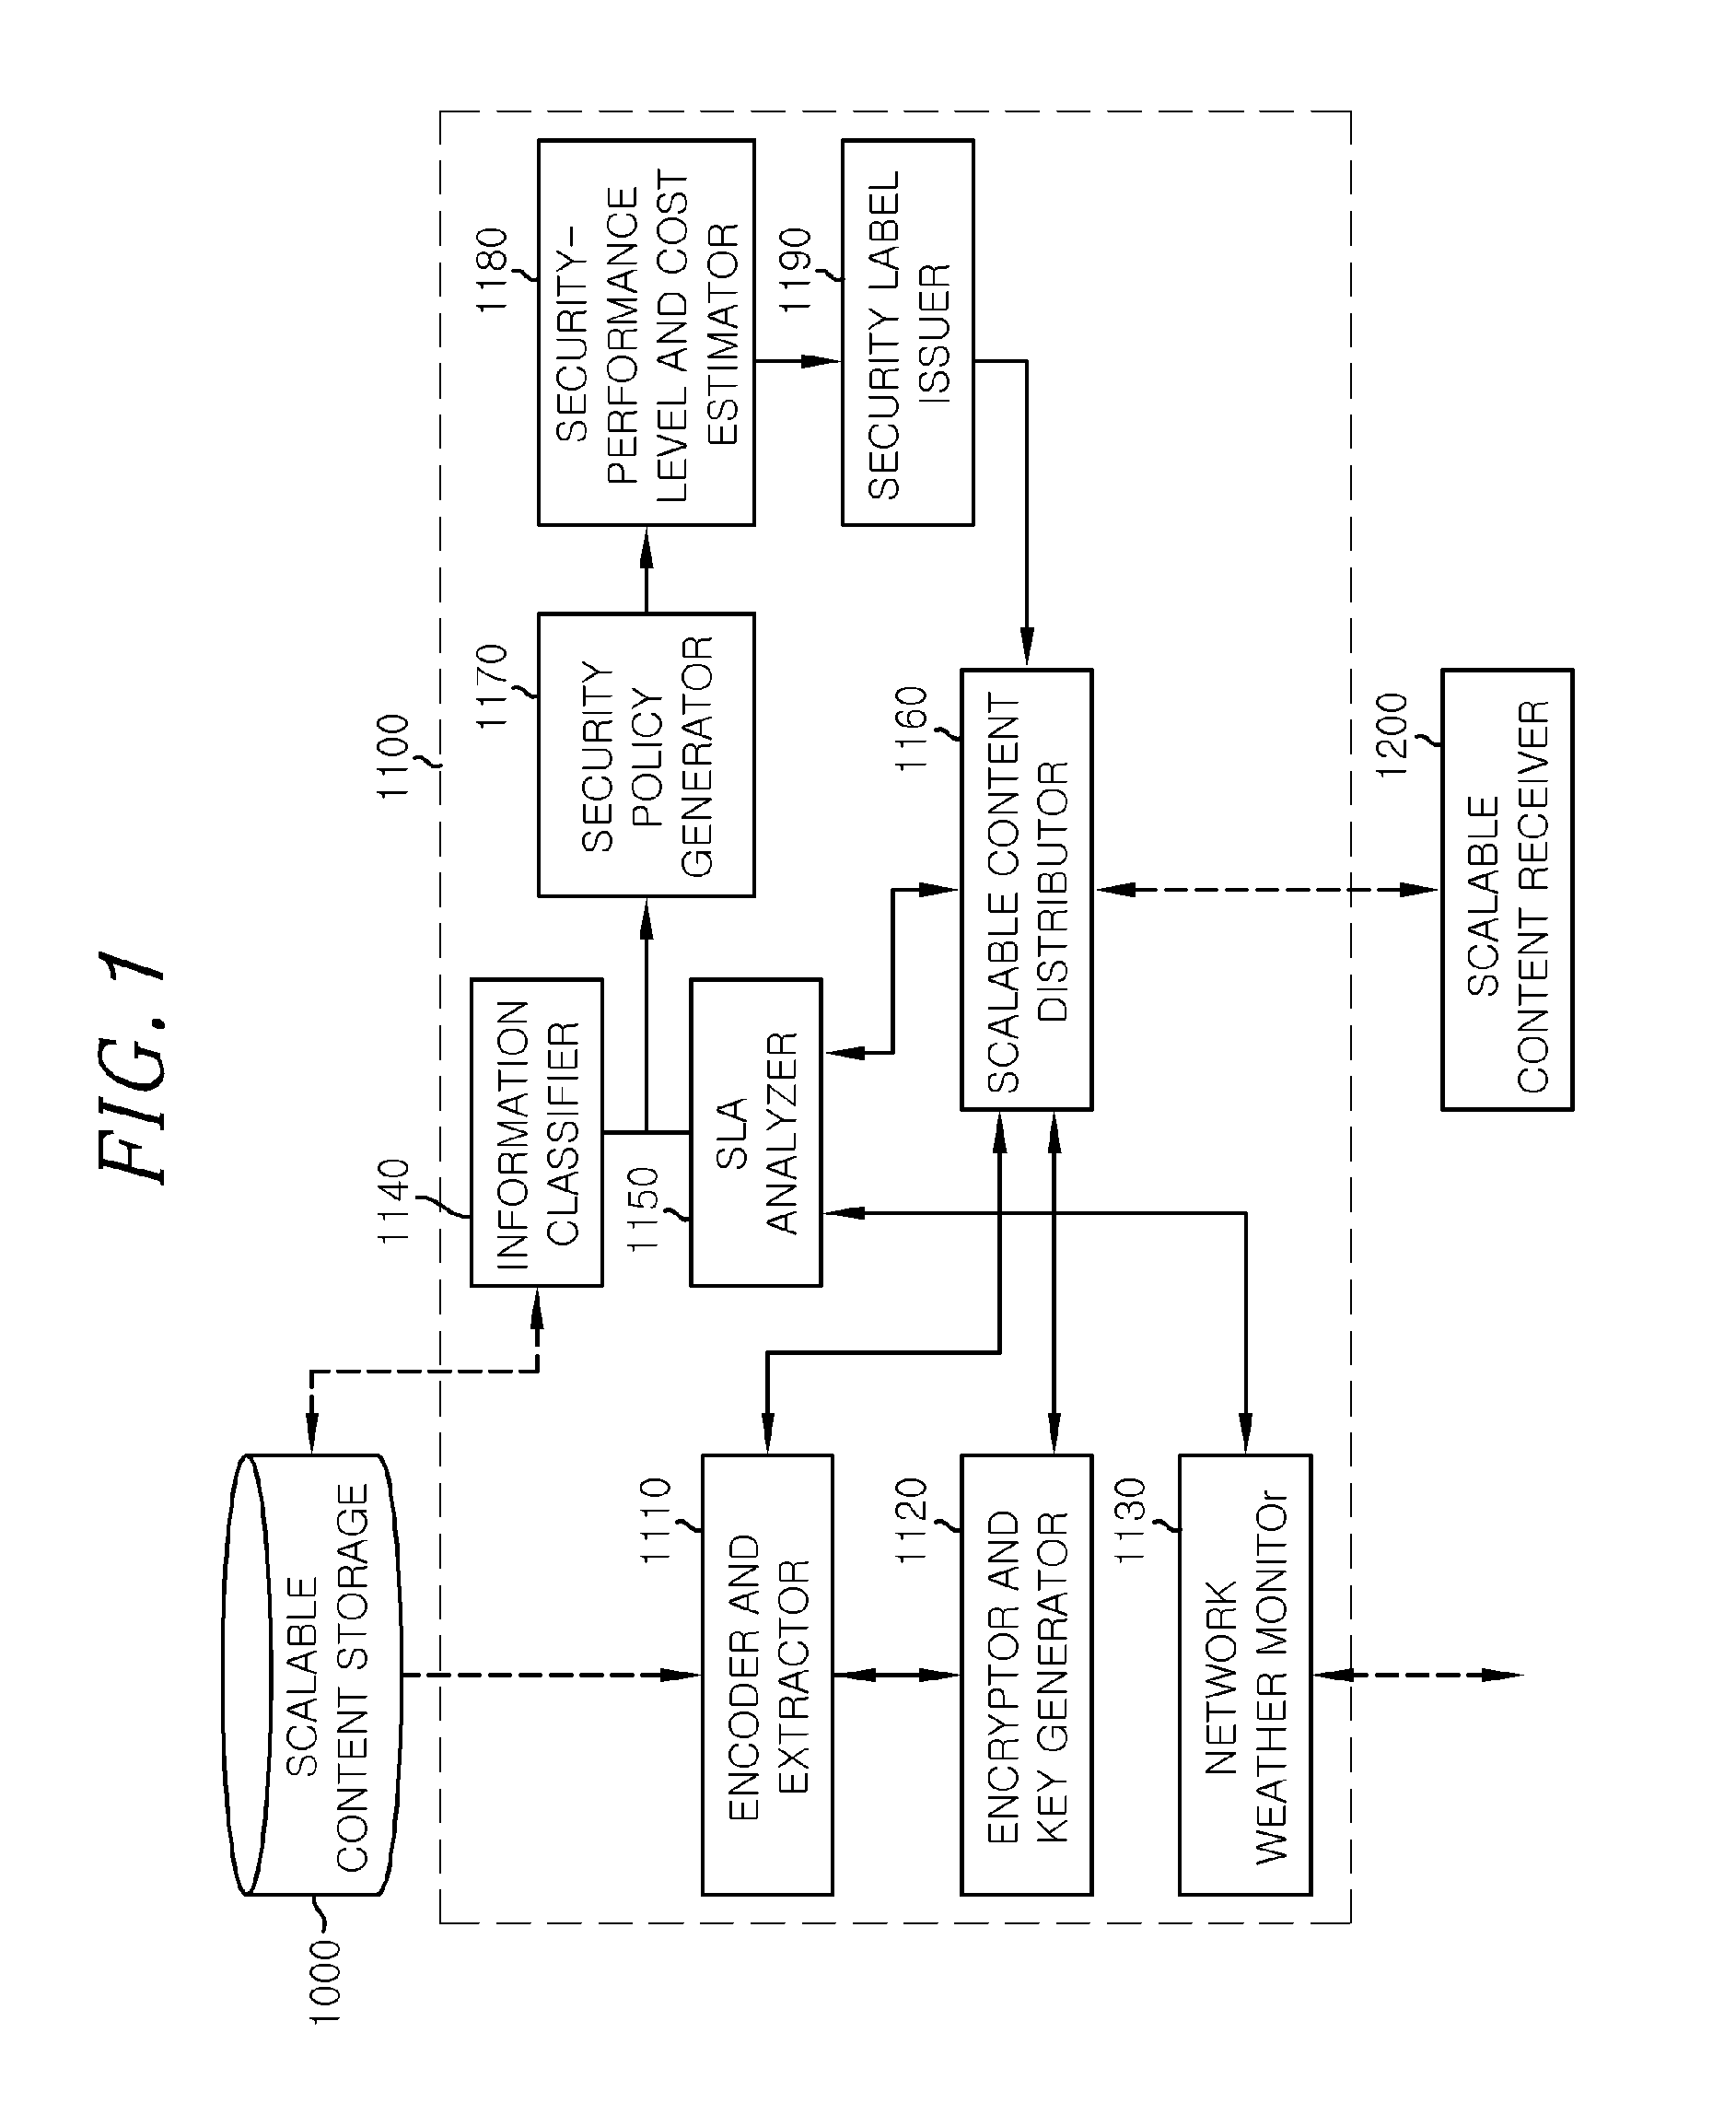 Security label generation method and apparatus for scalable content distribution